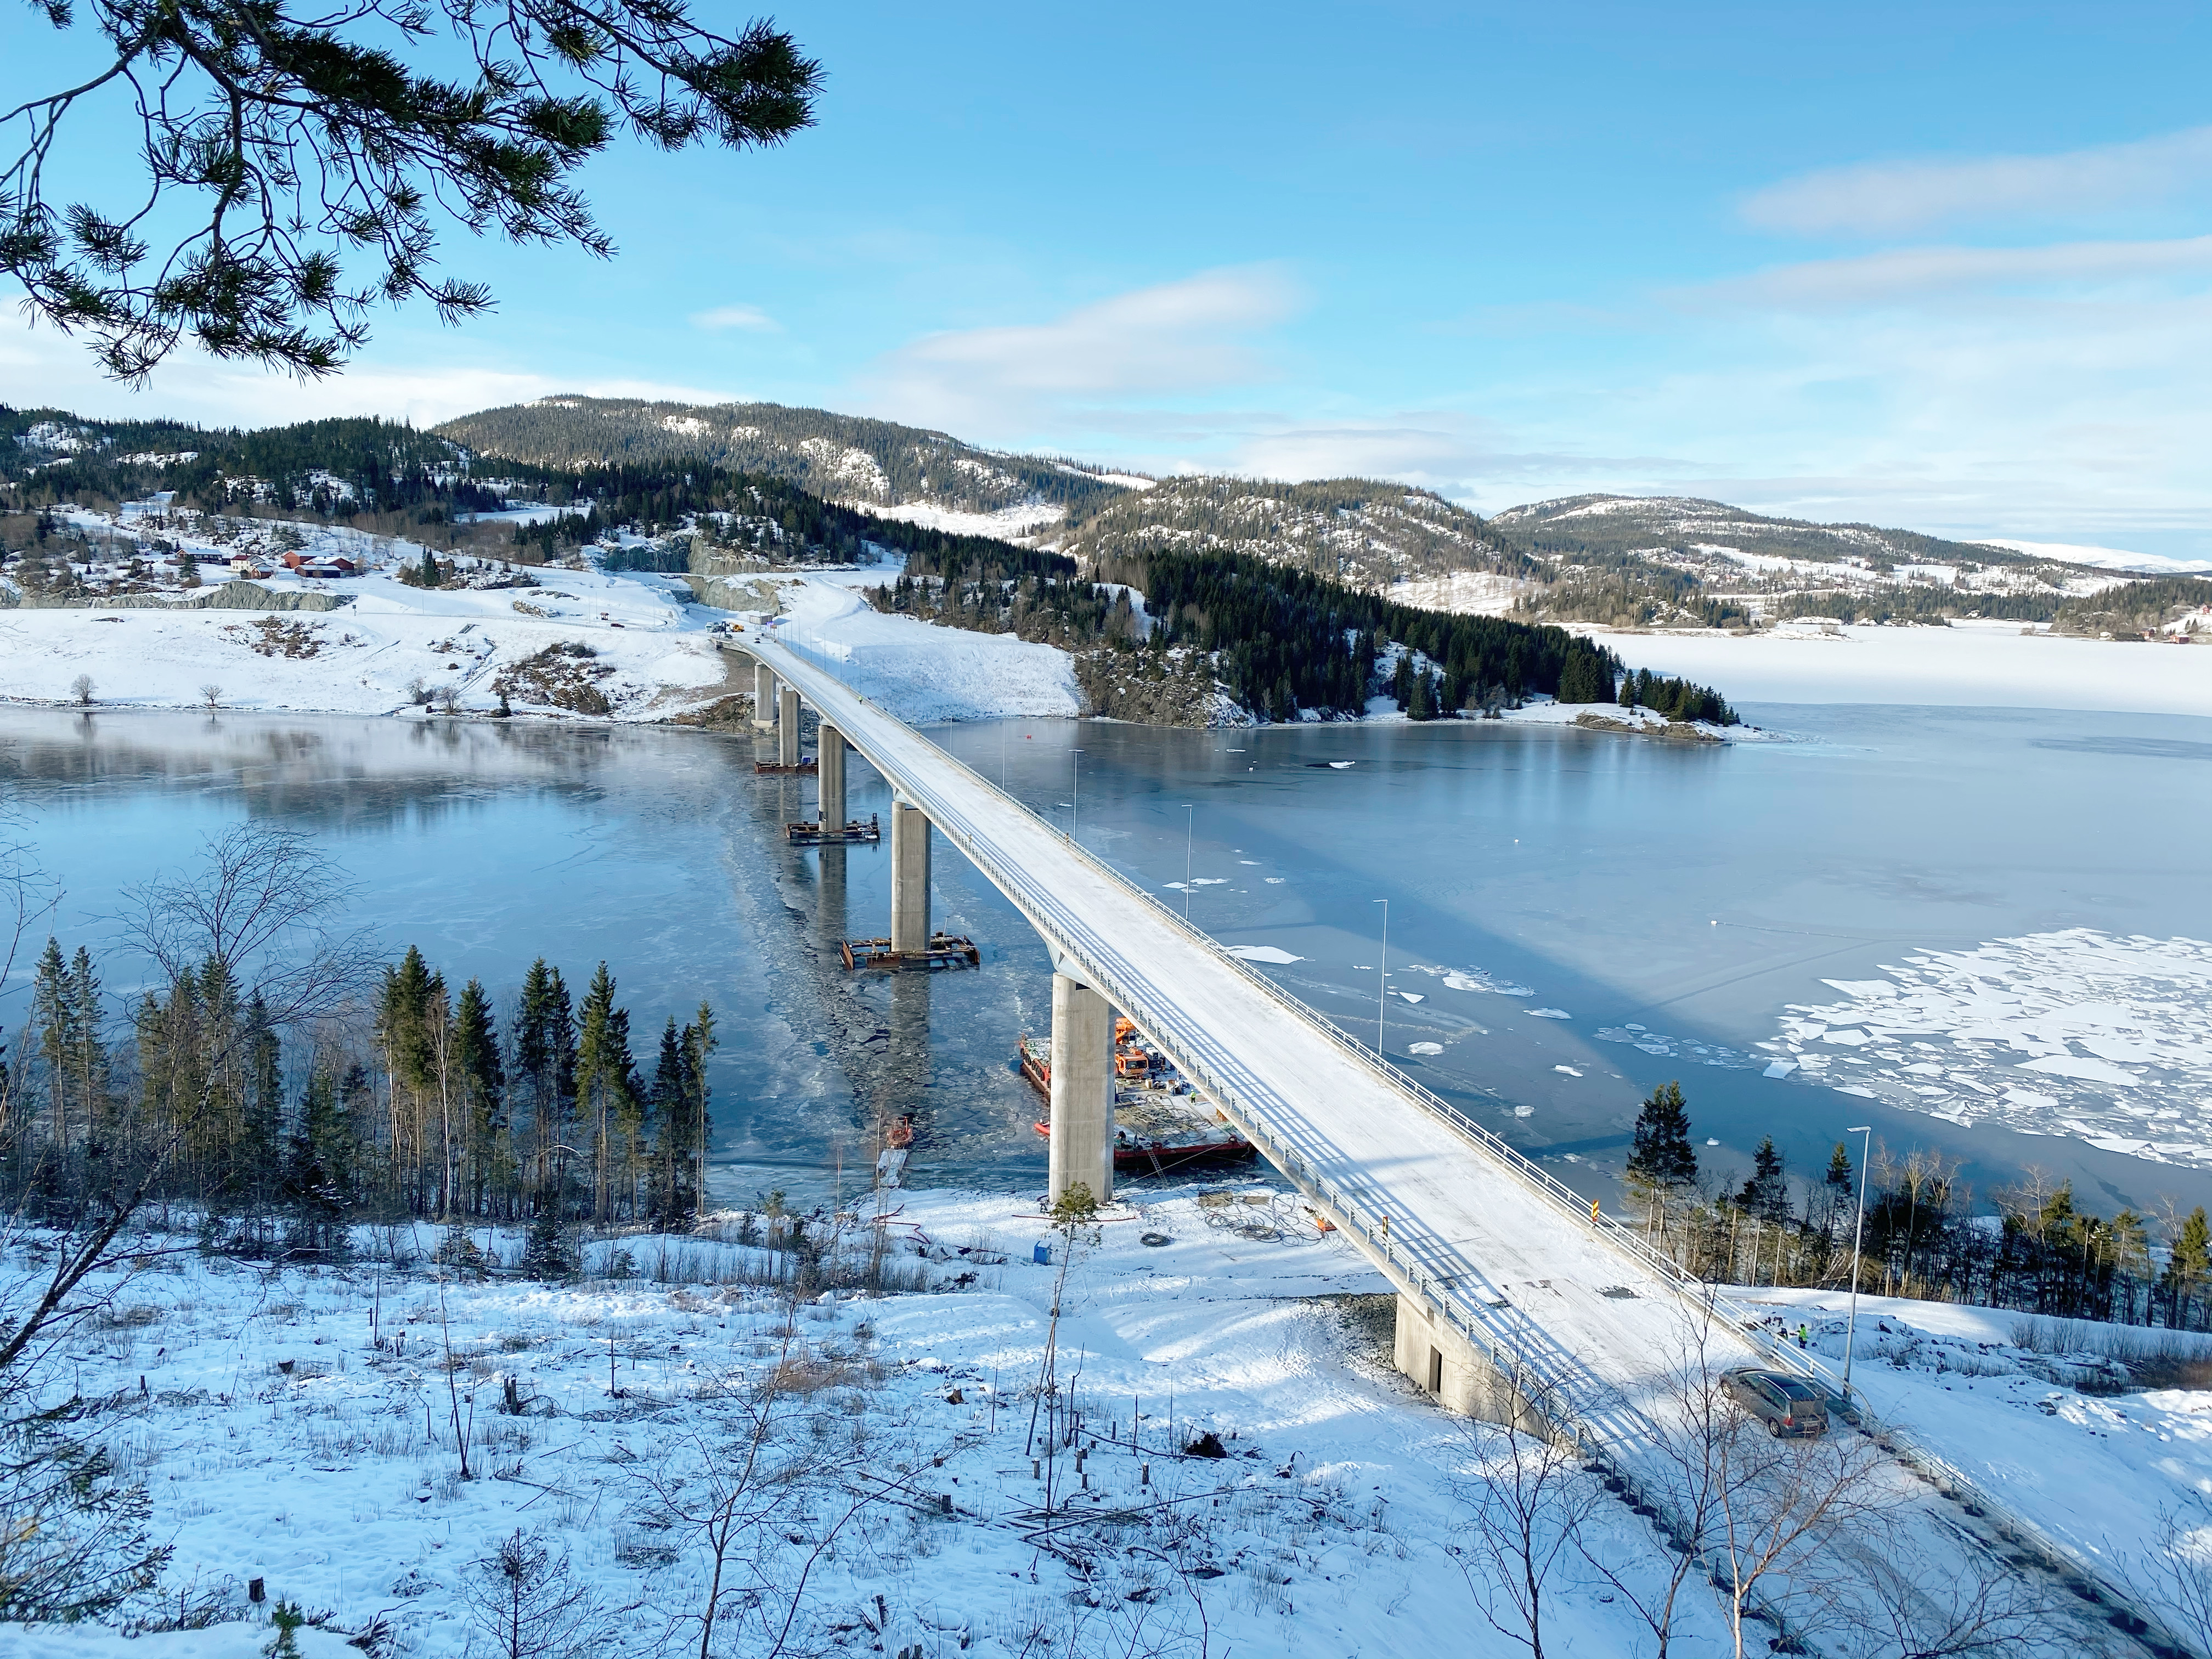 The Beitstad Bridge in Norway Was Officially Opened To Traffic.